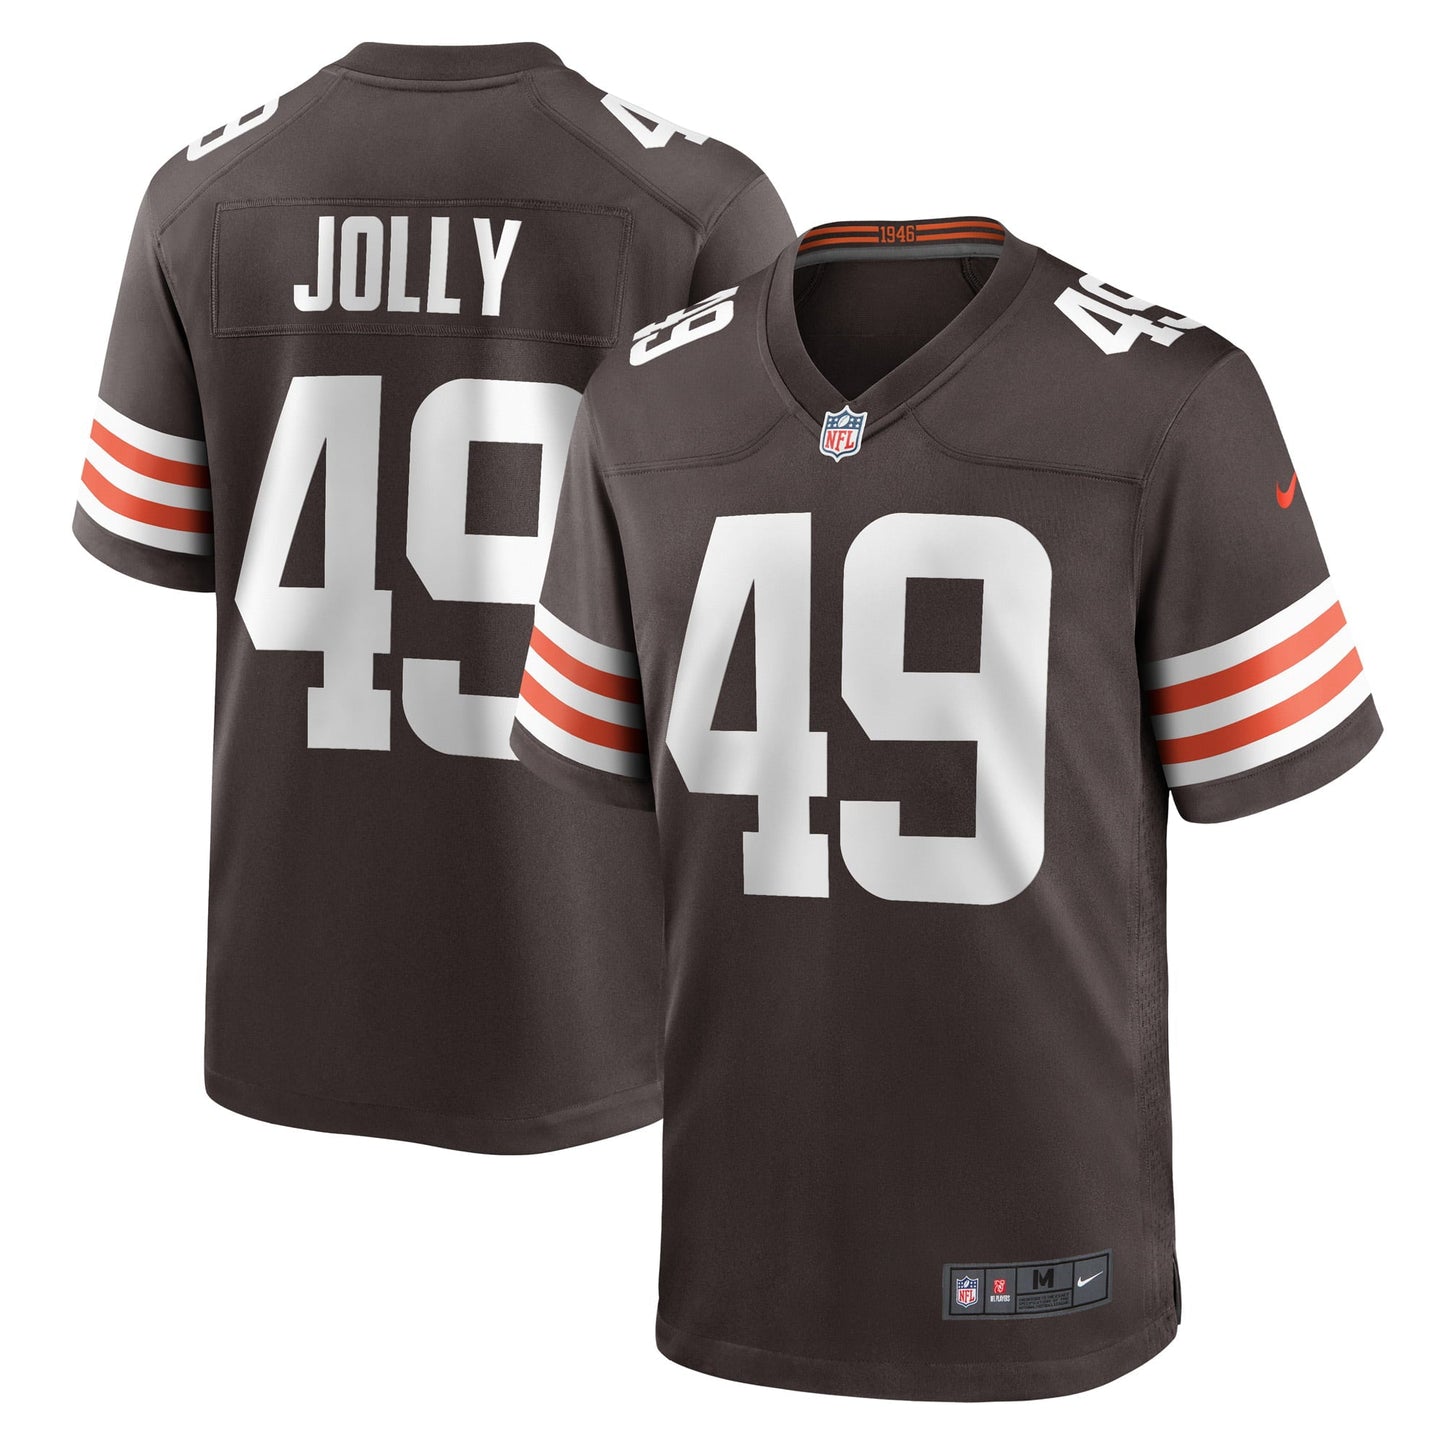 Men's Nike Shaun Jolly Brown Cleveland Browns Game Player Jersey